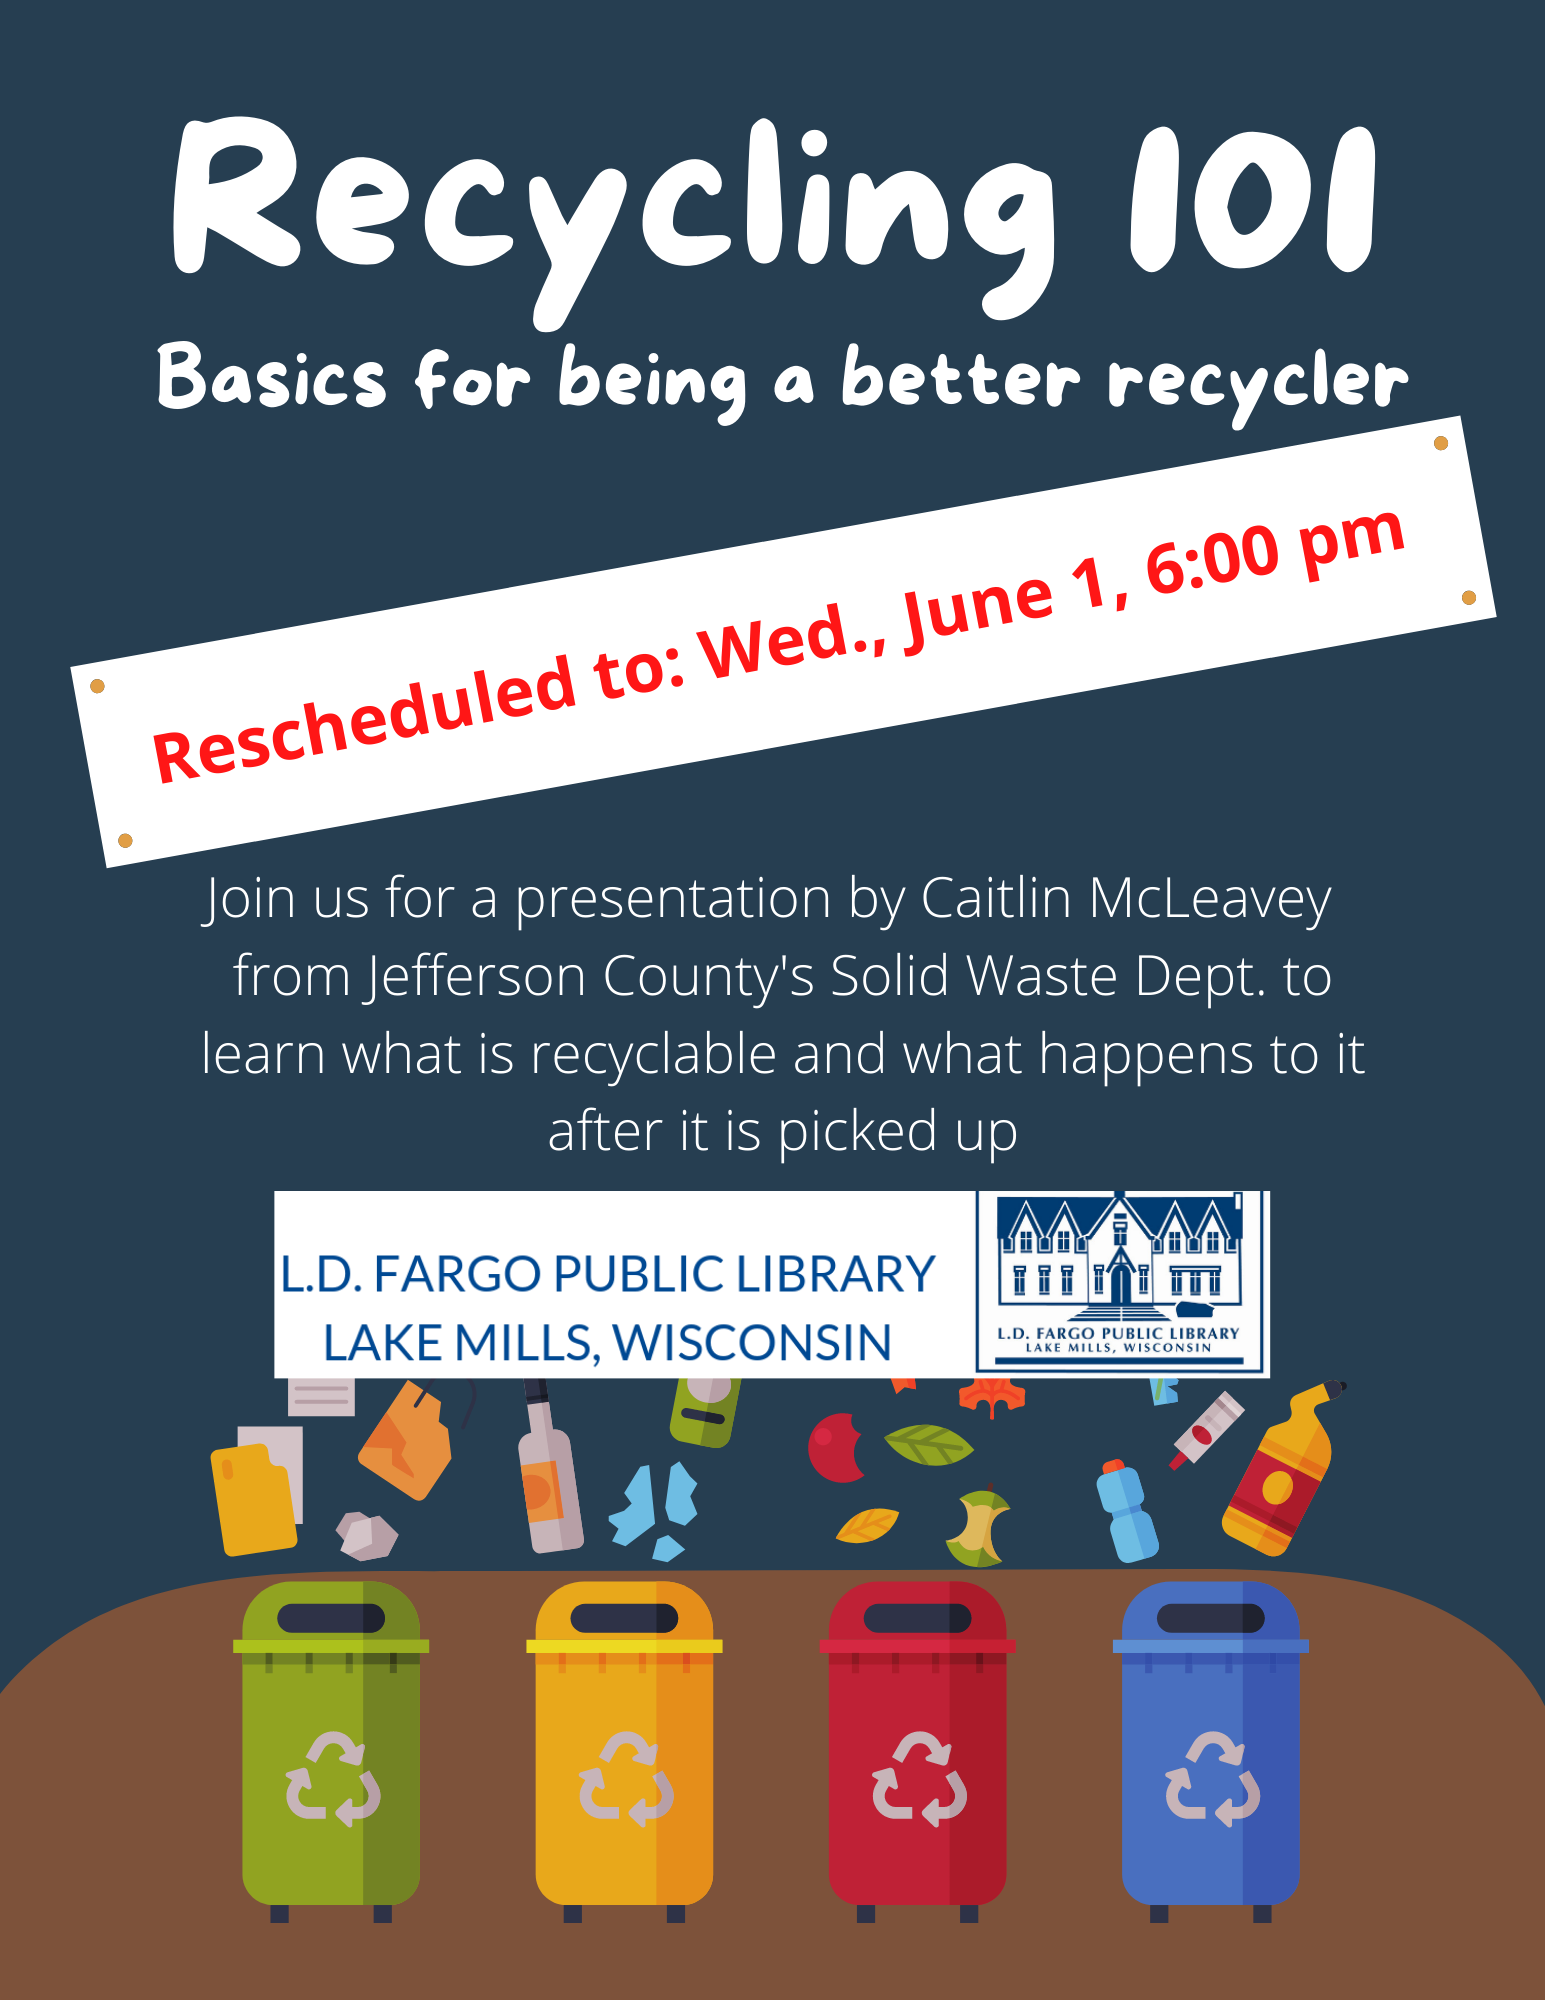 Recycling 101. Wednesday, June 1, 6:00 pm. Join us for a presentation by Caitlin McLeavey  from Jefferson County's Solid Waste Dept. to learn what is recyclable and what happens to it after it is picked up